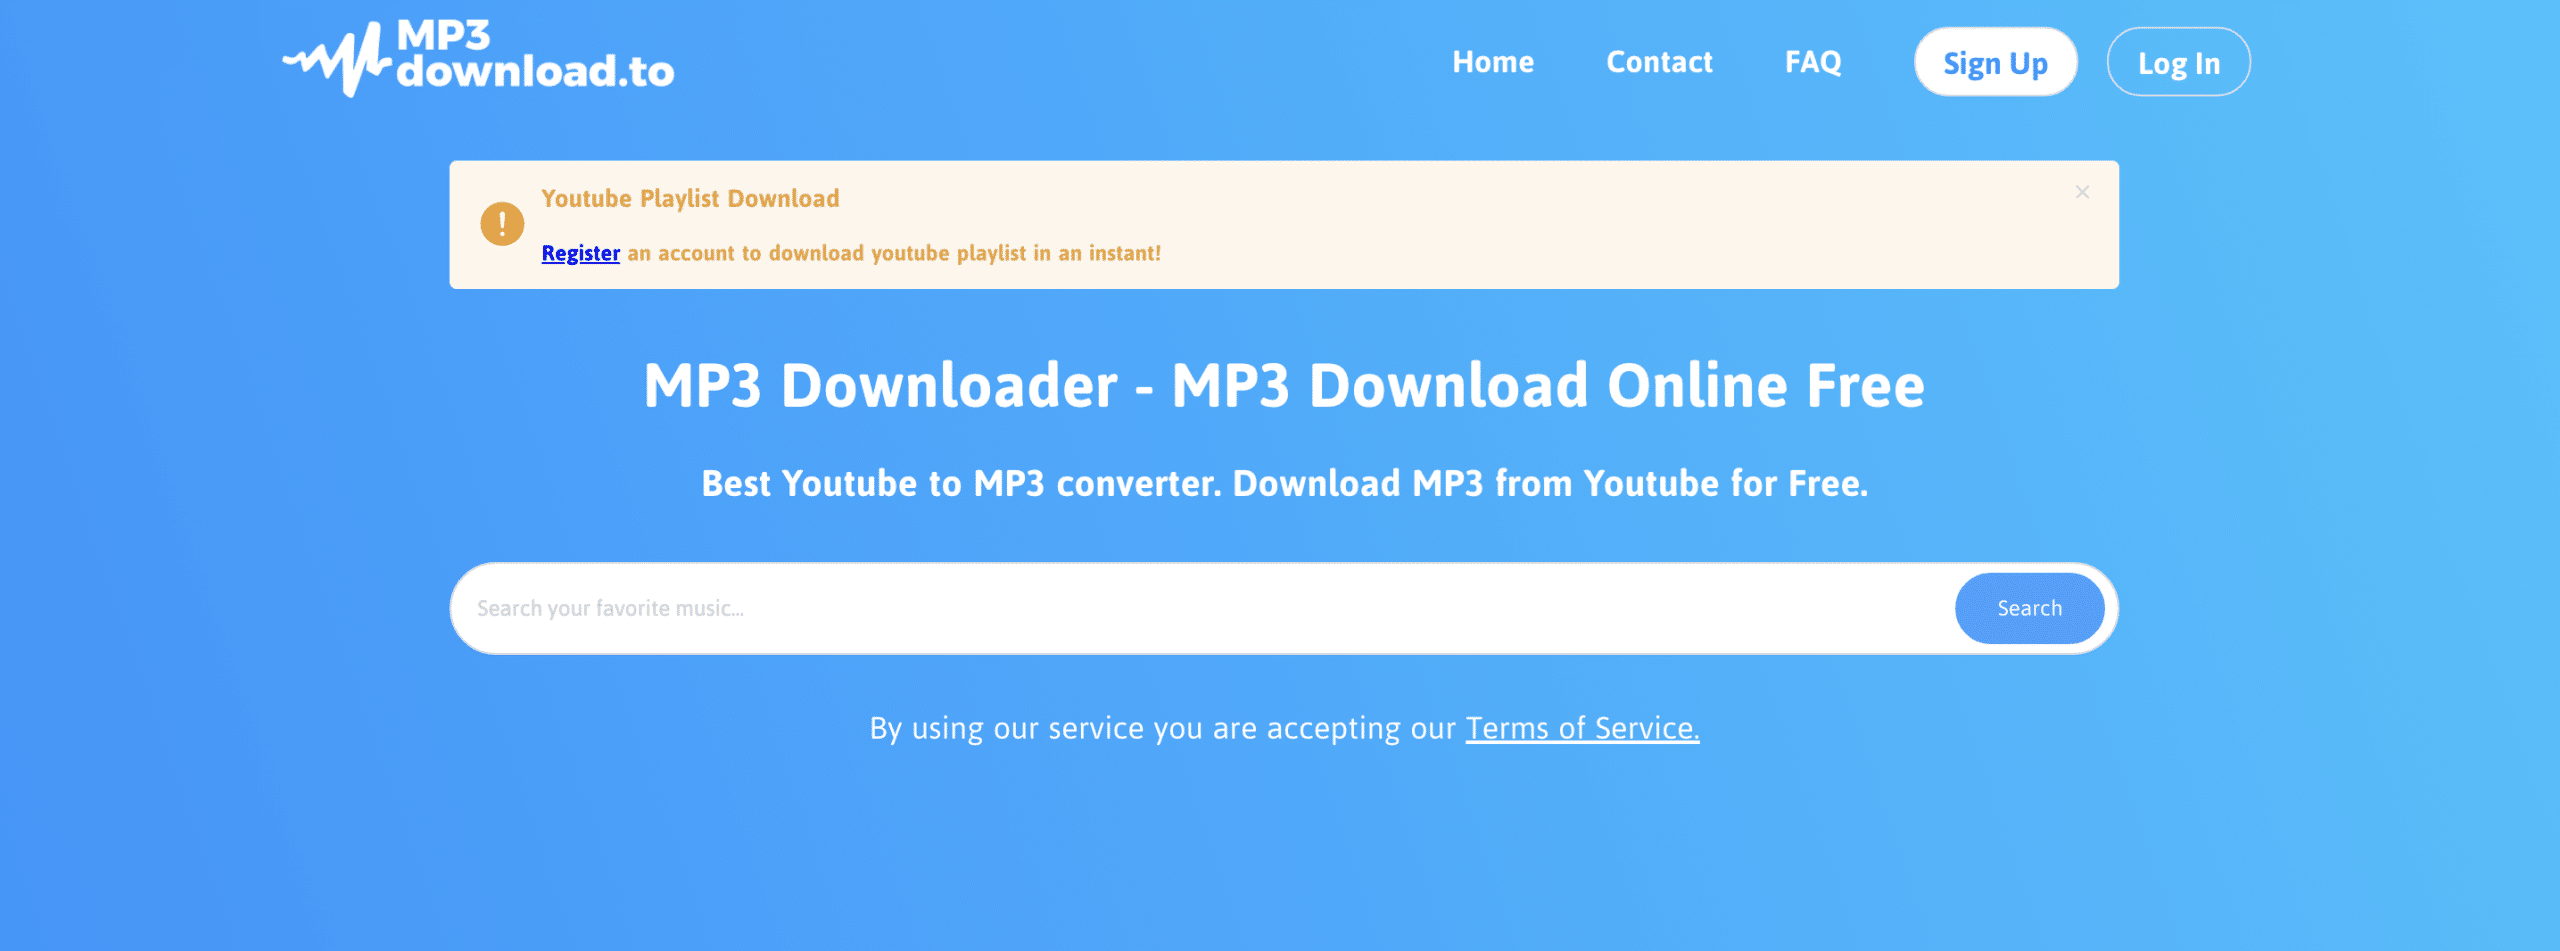 url to mp3